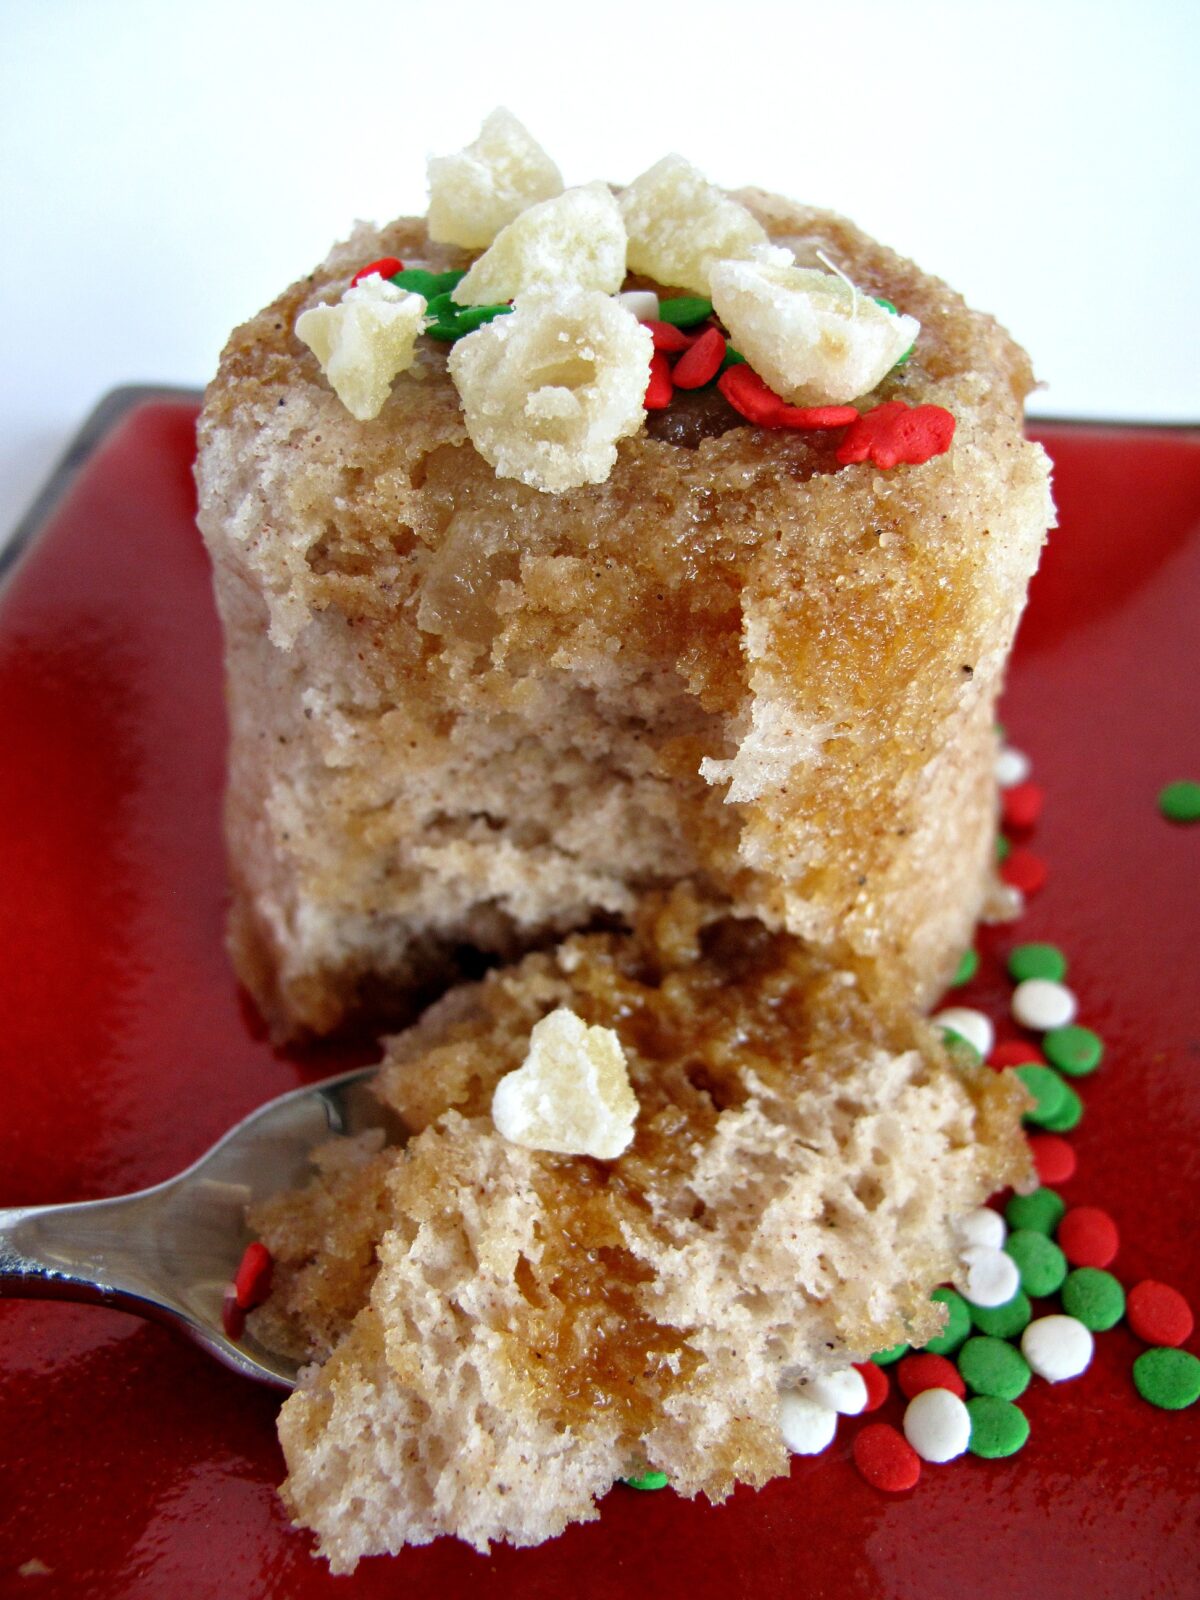 A spoonful of Gingerbread Mug Cake in front of the mug cake on a plate.